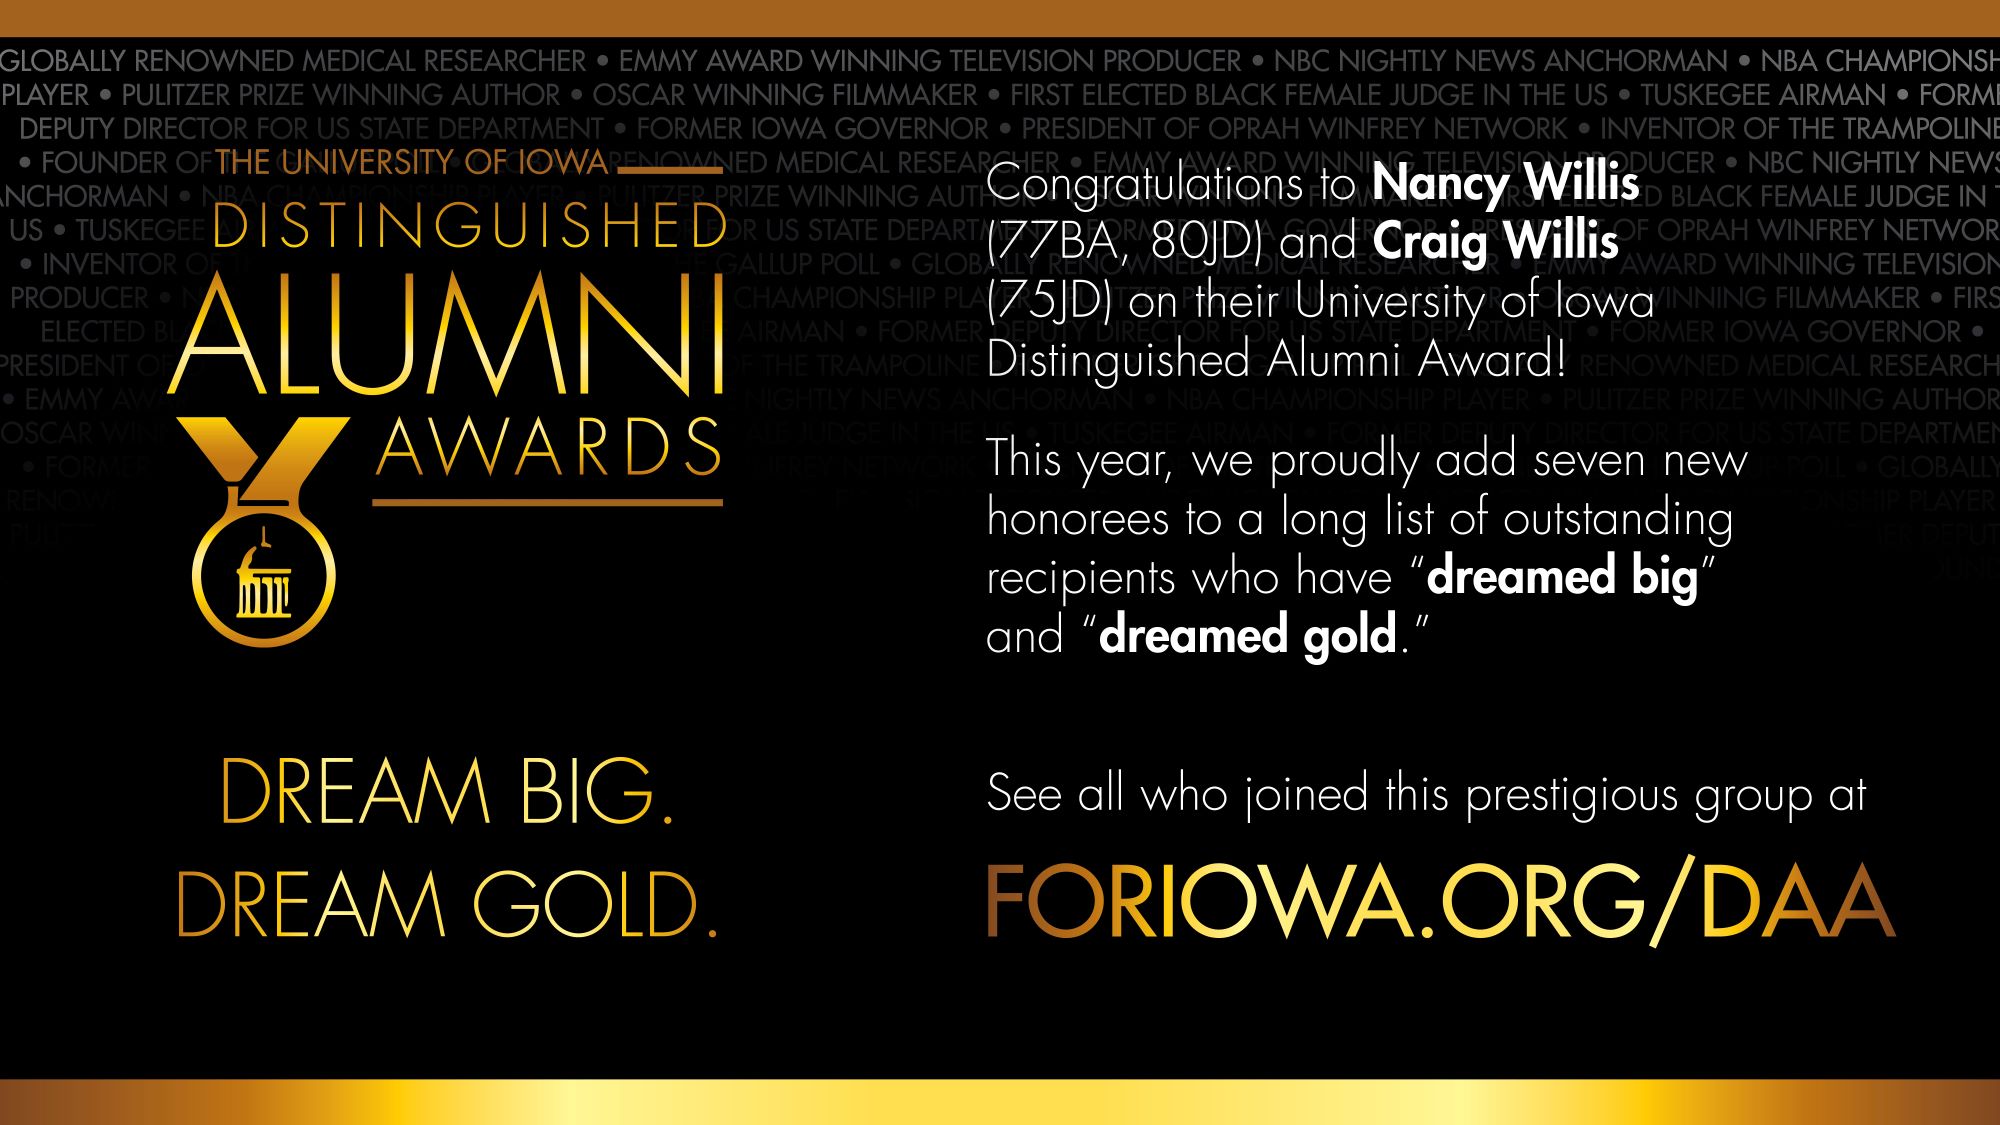 The University of Iowa Distinguished Alumni Awards 2019. See all who joined the prestigious group at foriowa.org/daa. 